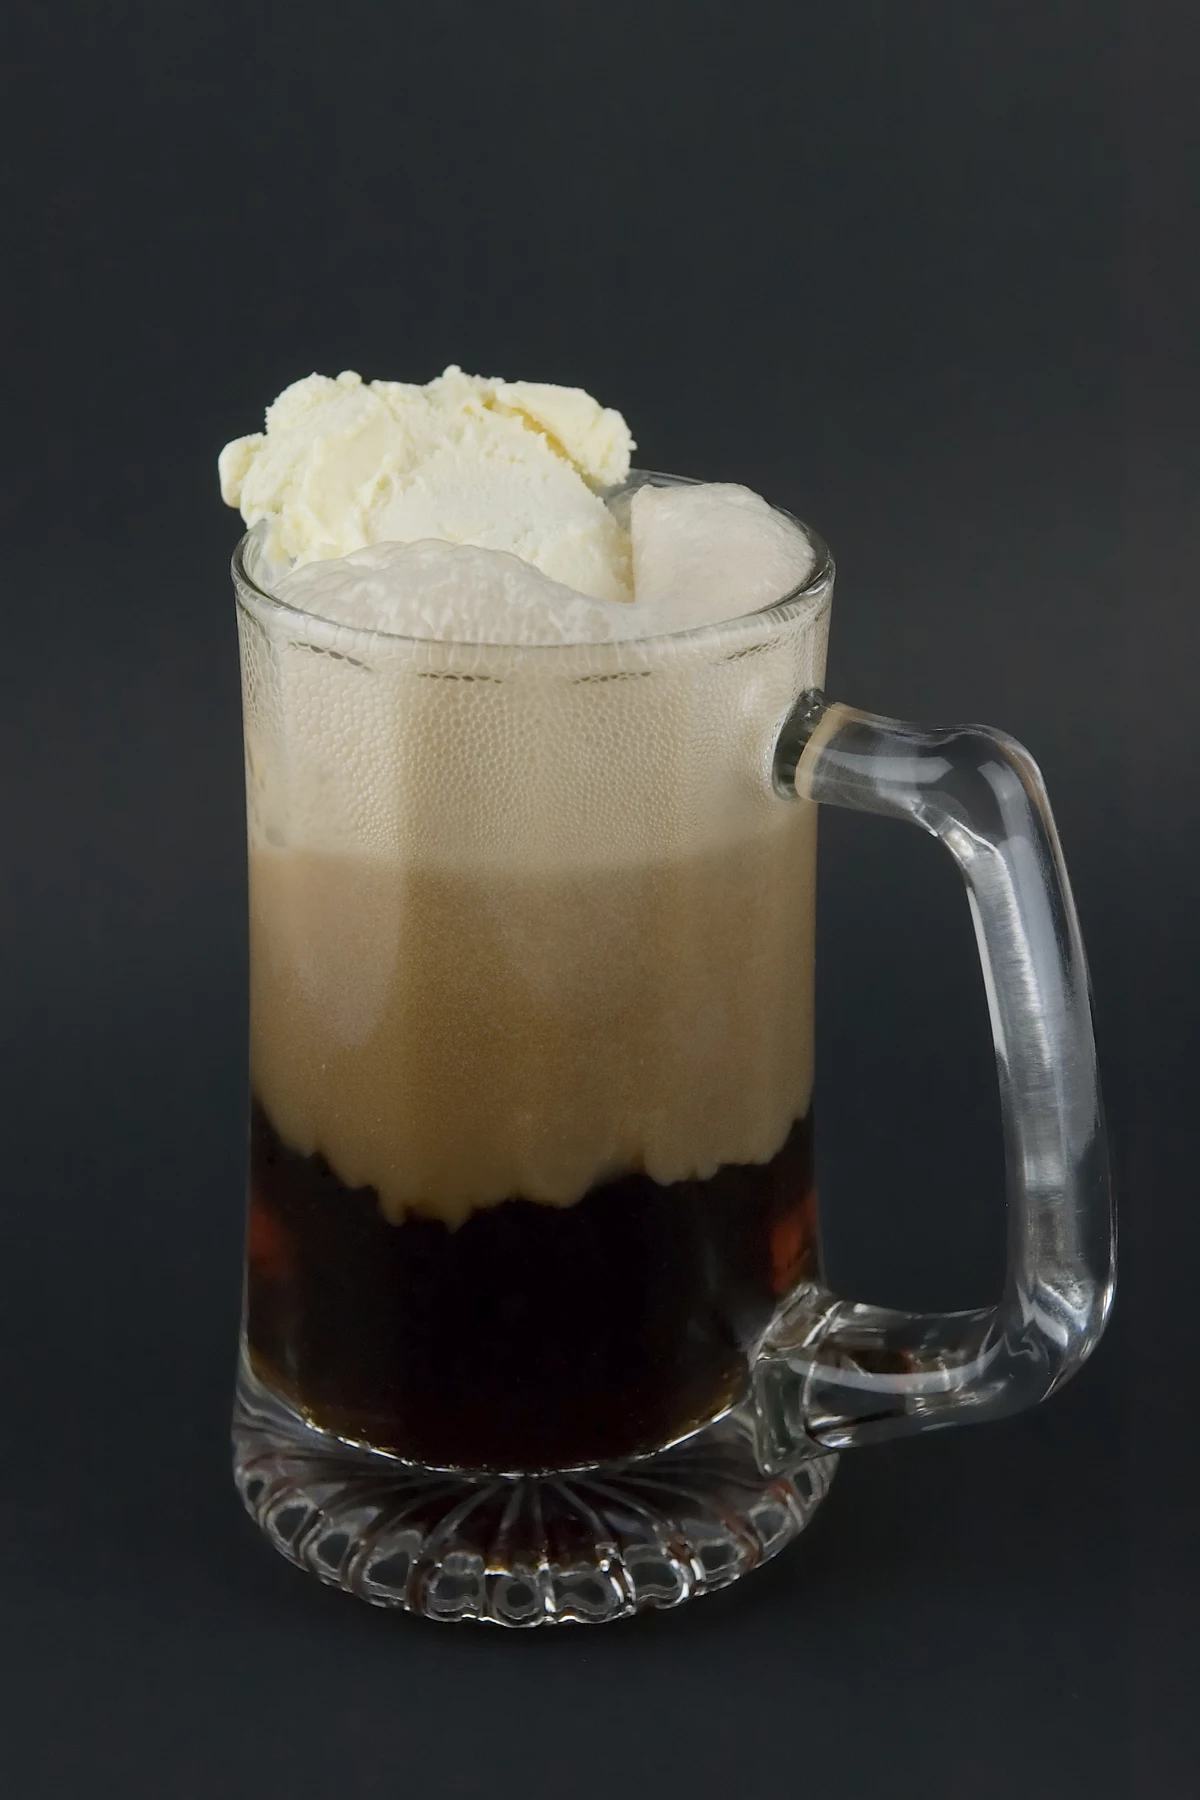 Free Root Beer Floats Today in the Treasure Valley